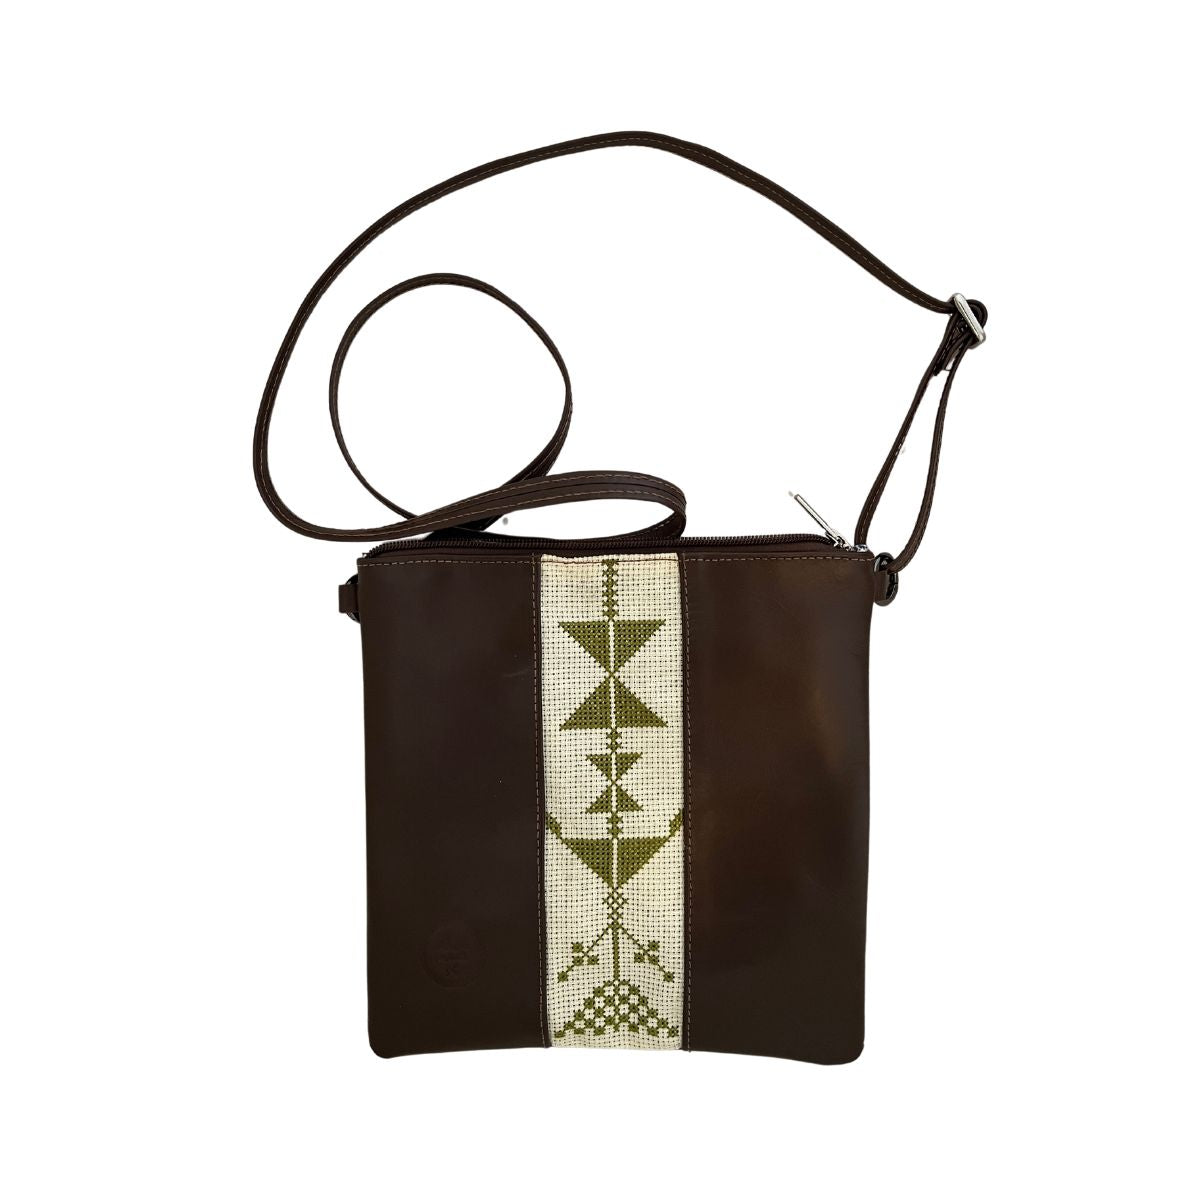 Leather Cross Body Bag with Embroidery (Light brown leather